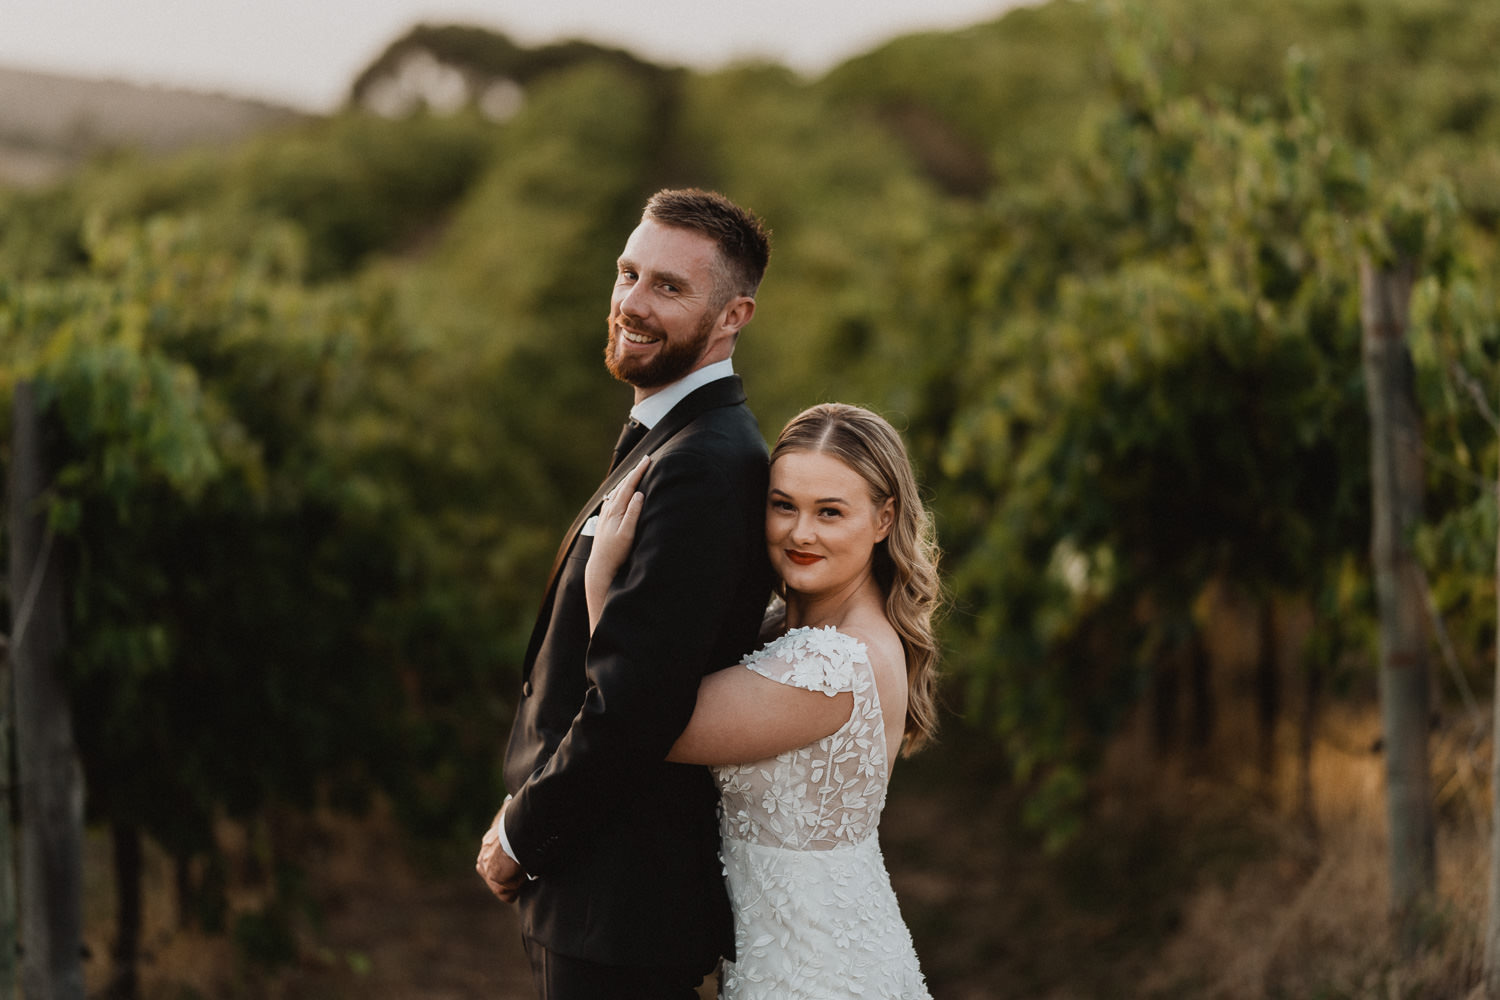 Chapel Hill wedding photo in the vines close to sunset